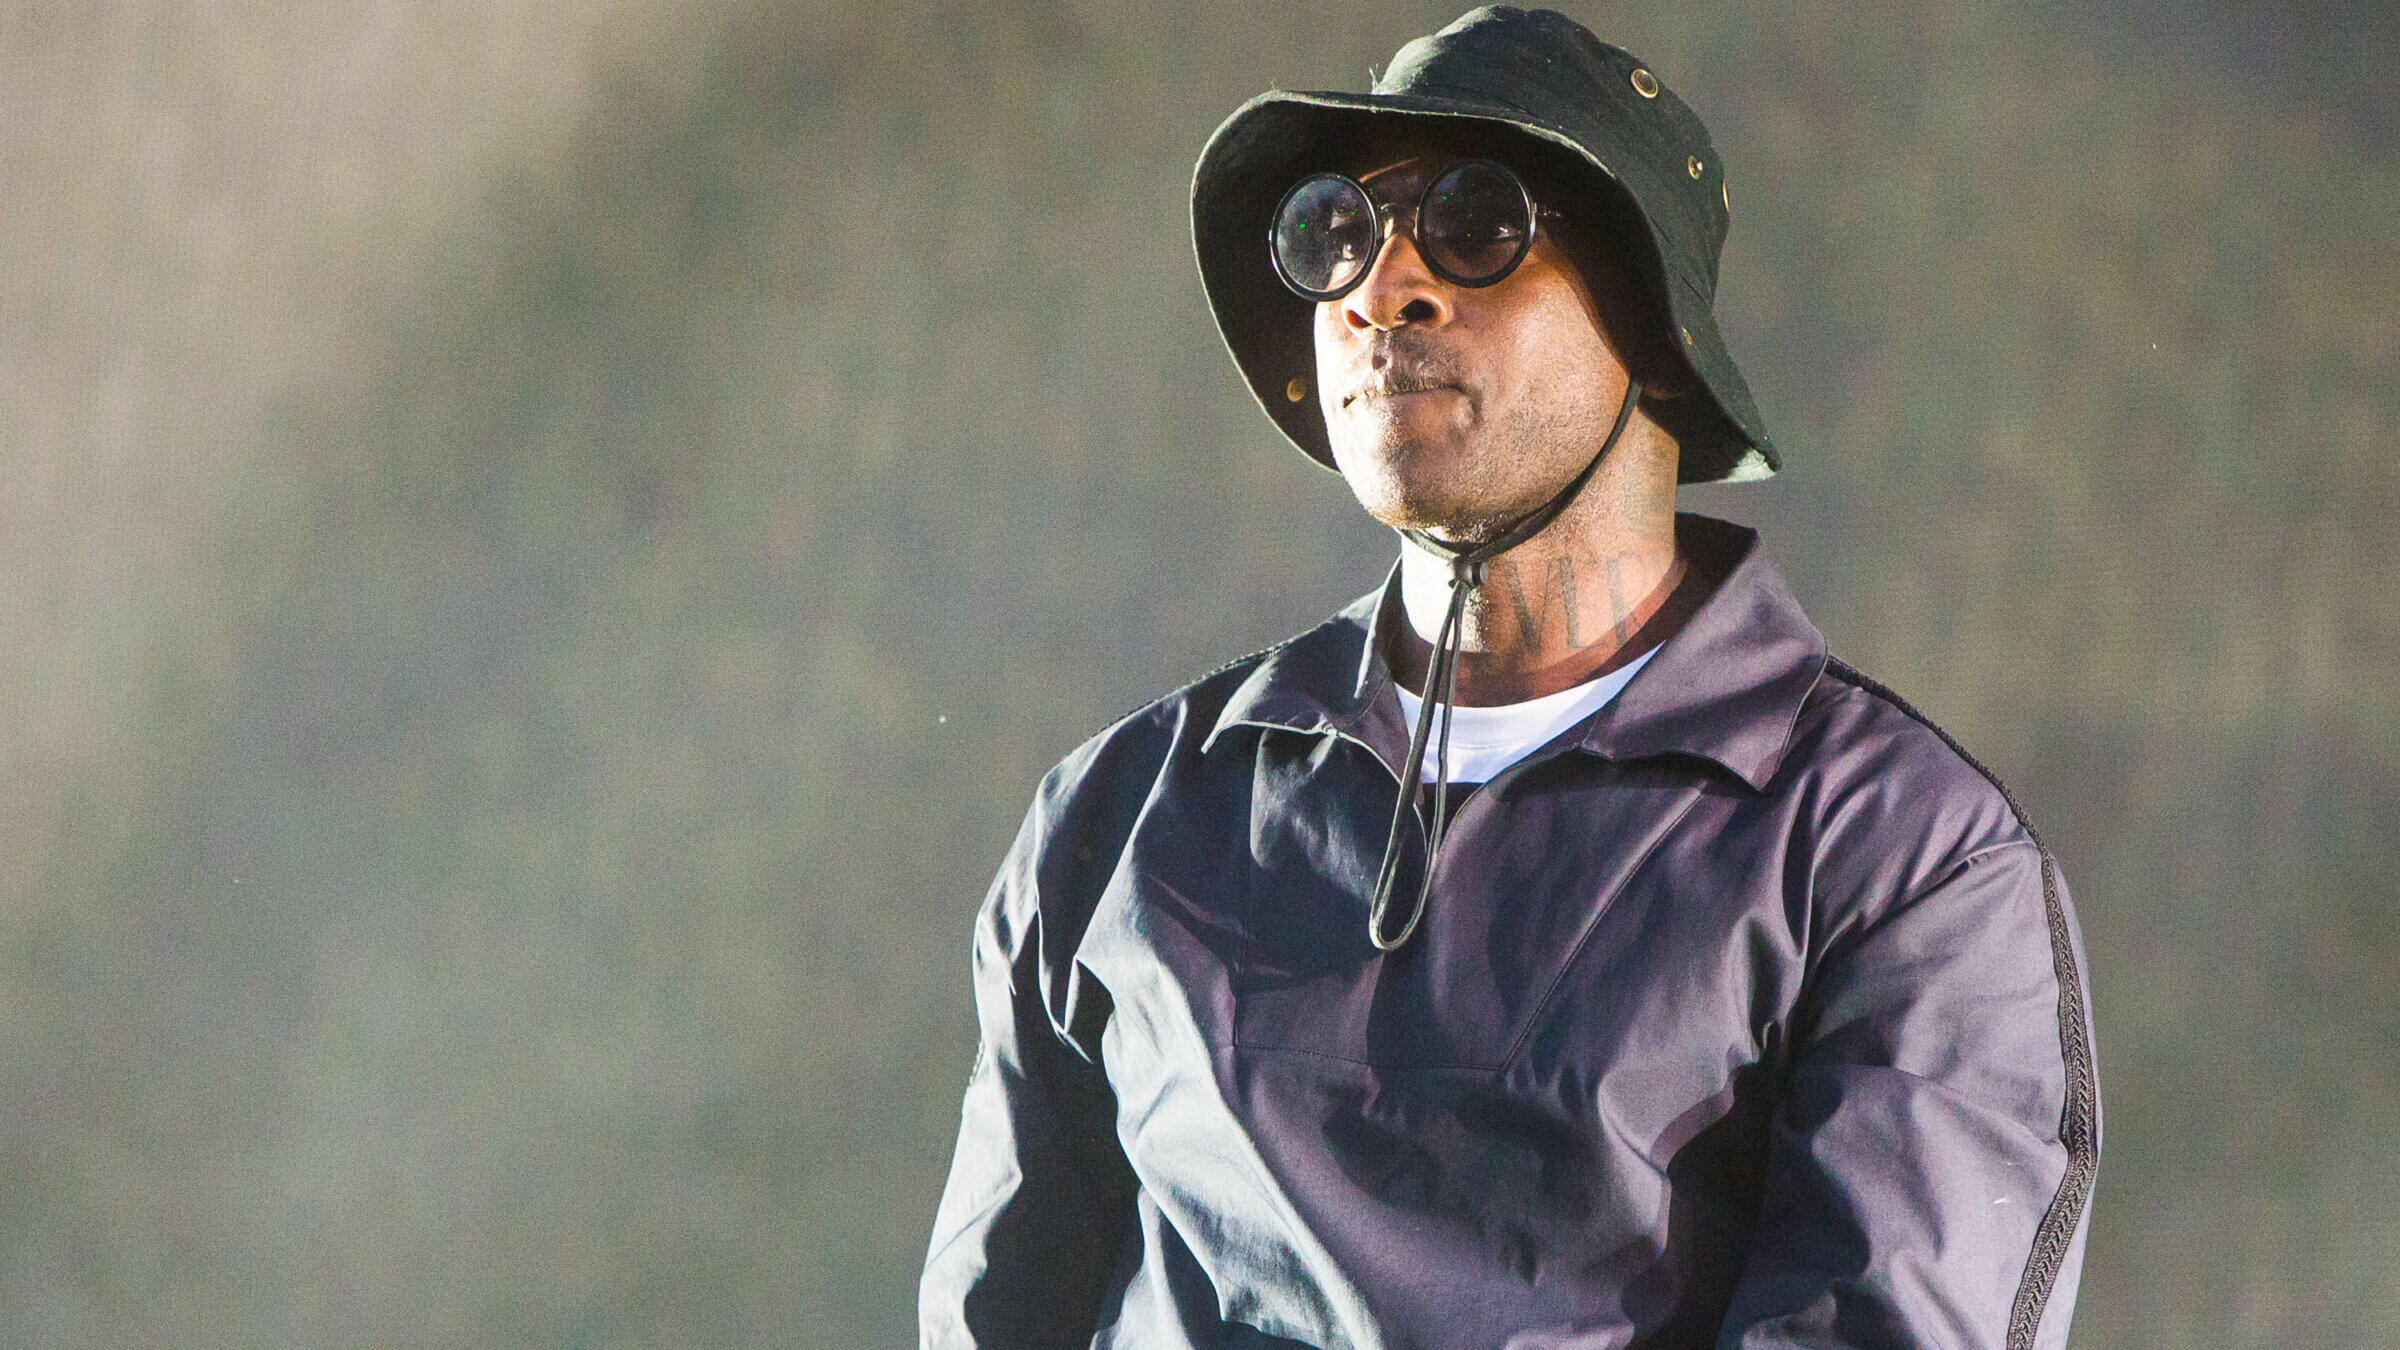 Skepta performs at Wireless Festival Day 2 at Finsbury Park on July 8, 2017 in London, England.  